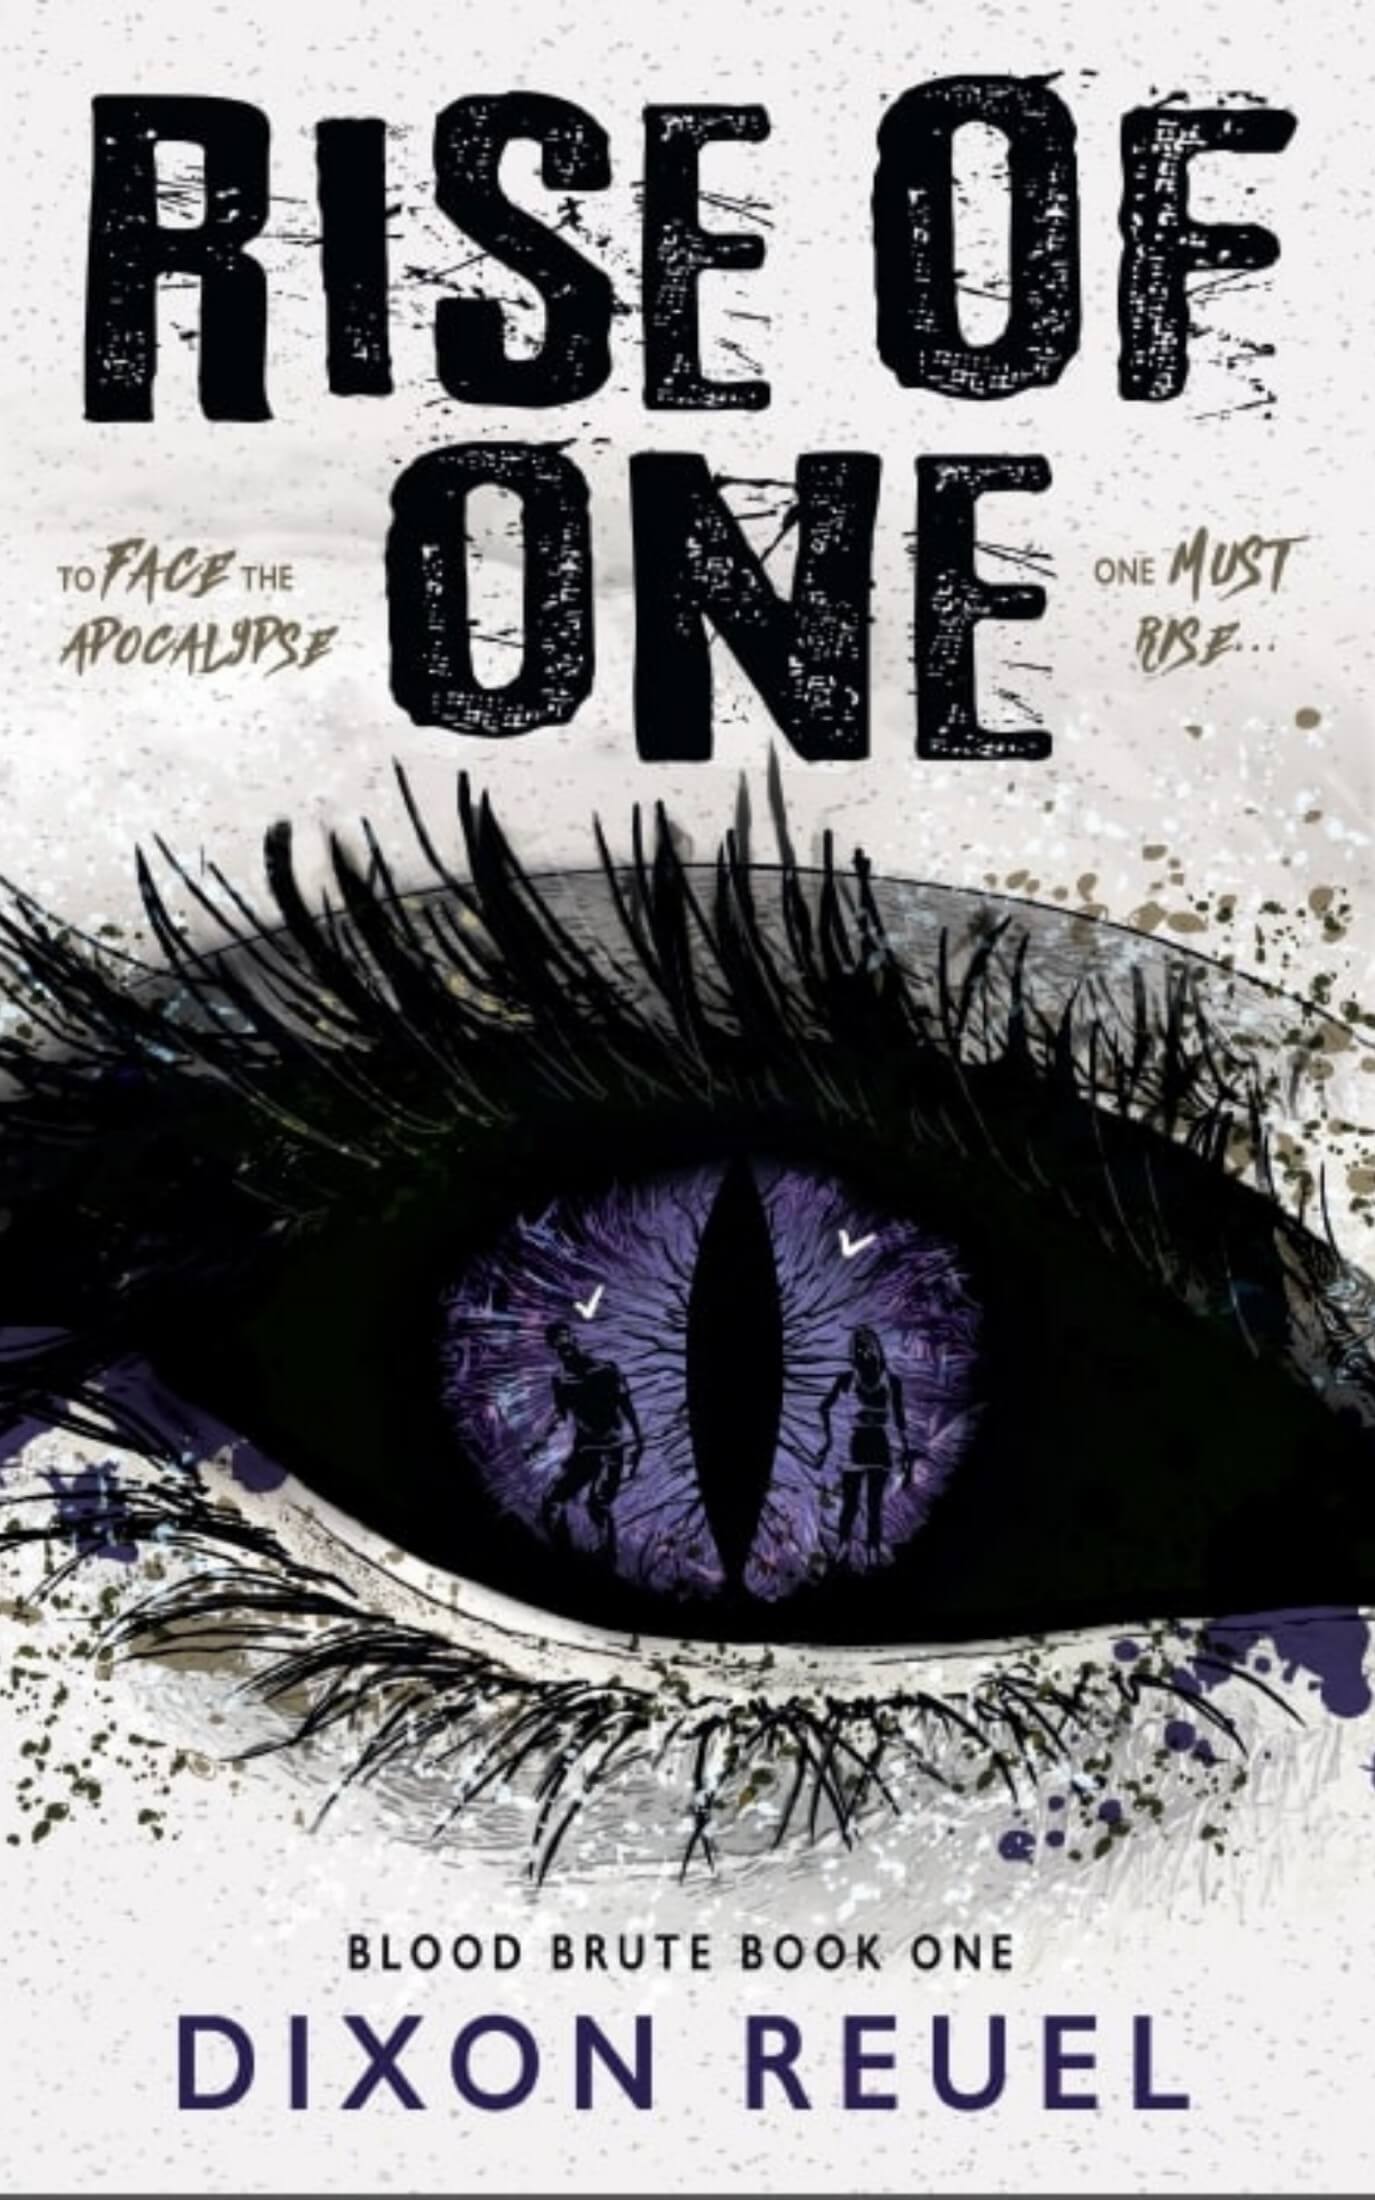 Book cover of Rise of One by Dixon Reuel